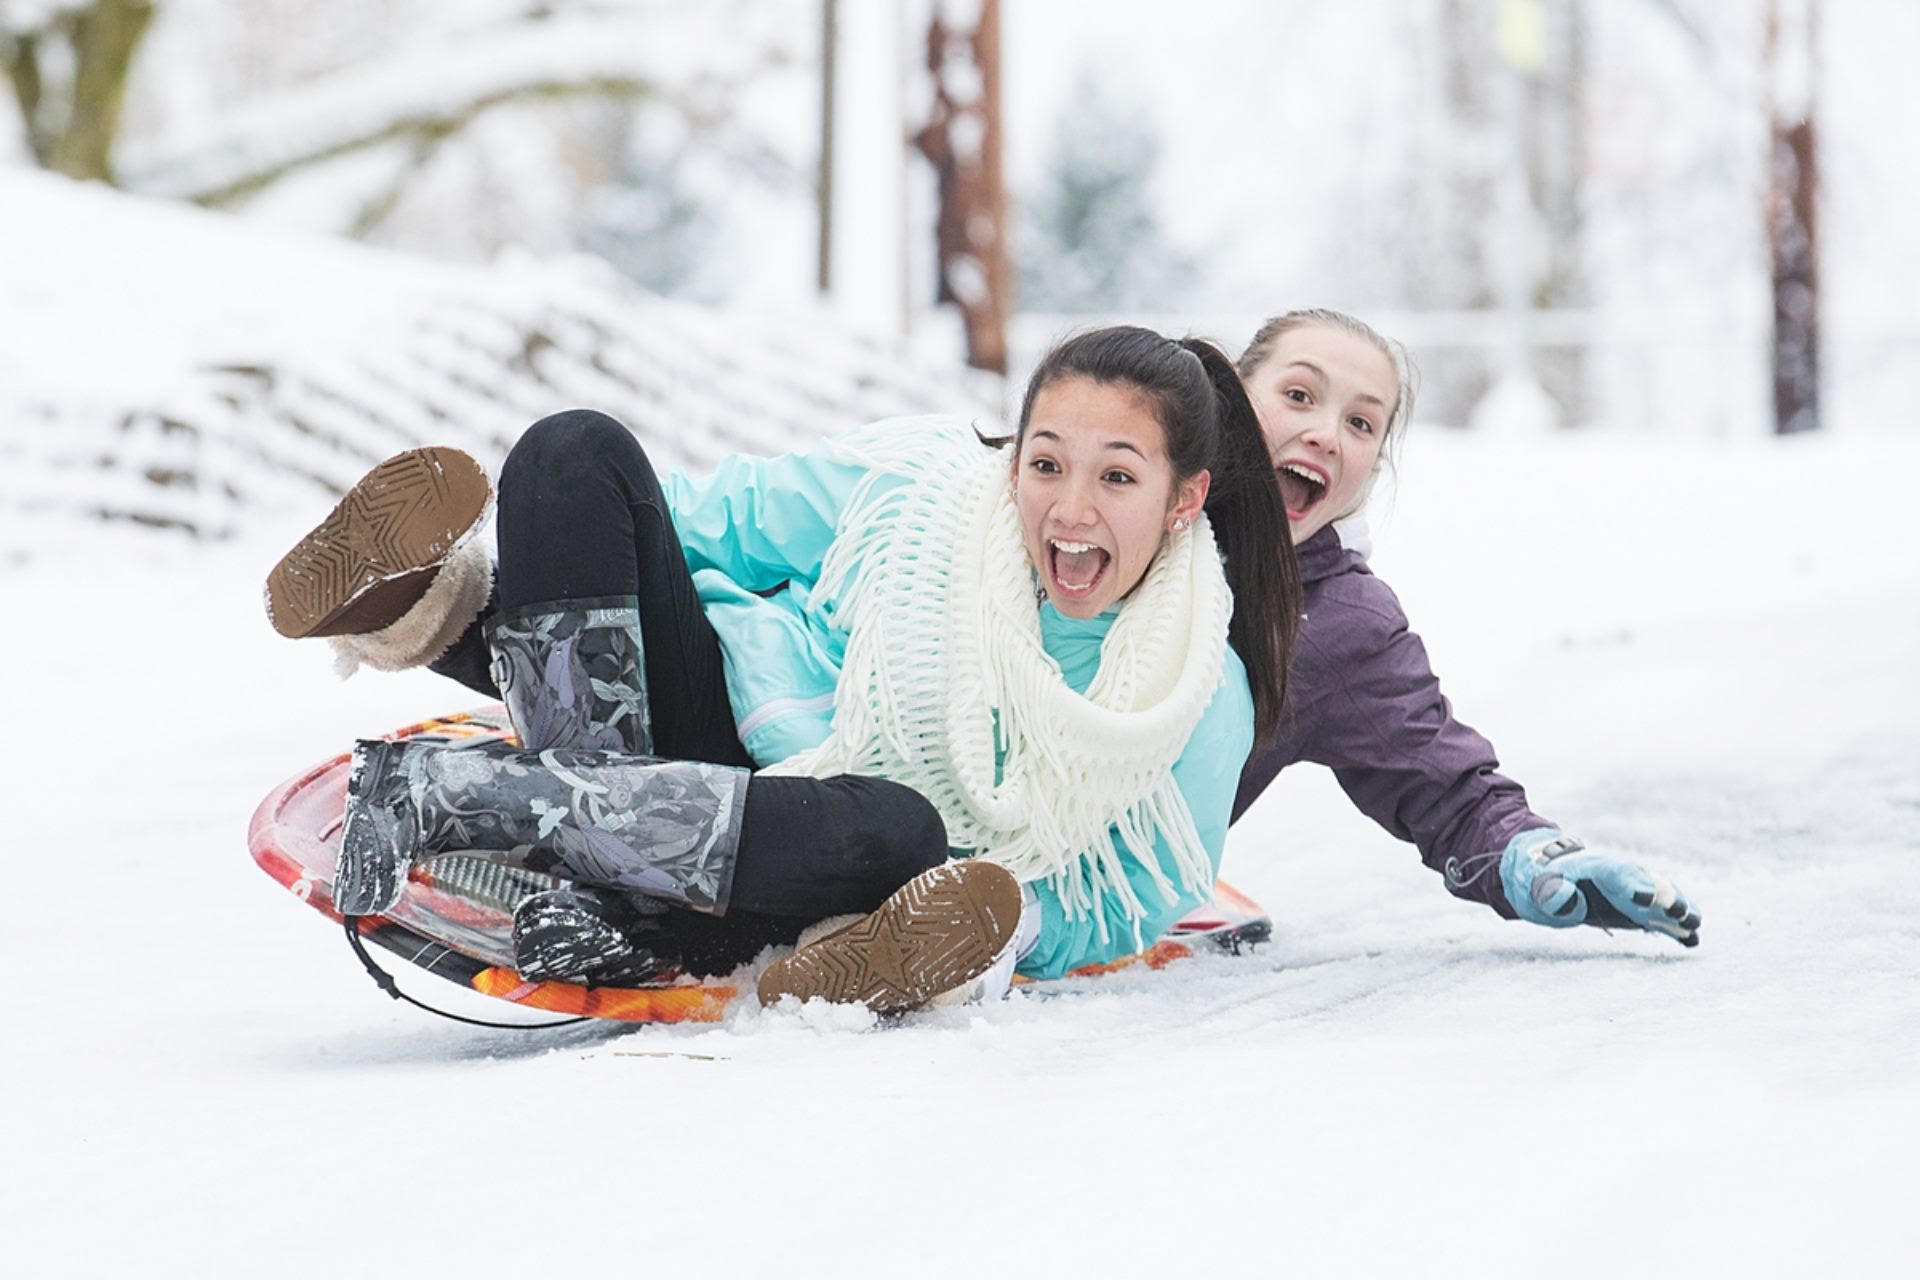 Two young girls sledding down hill in ice and snow